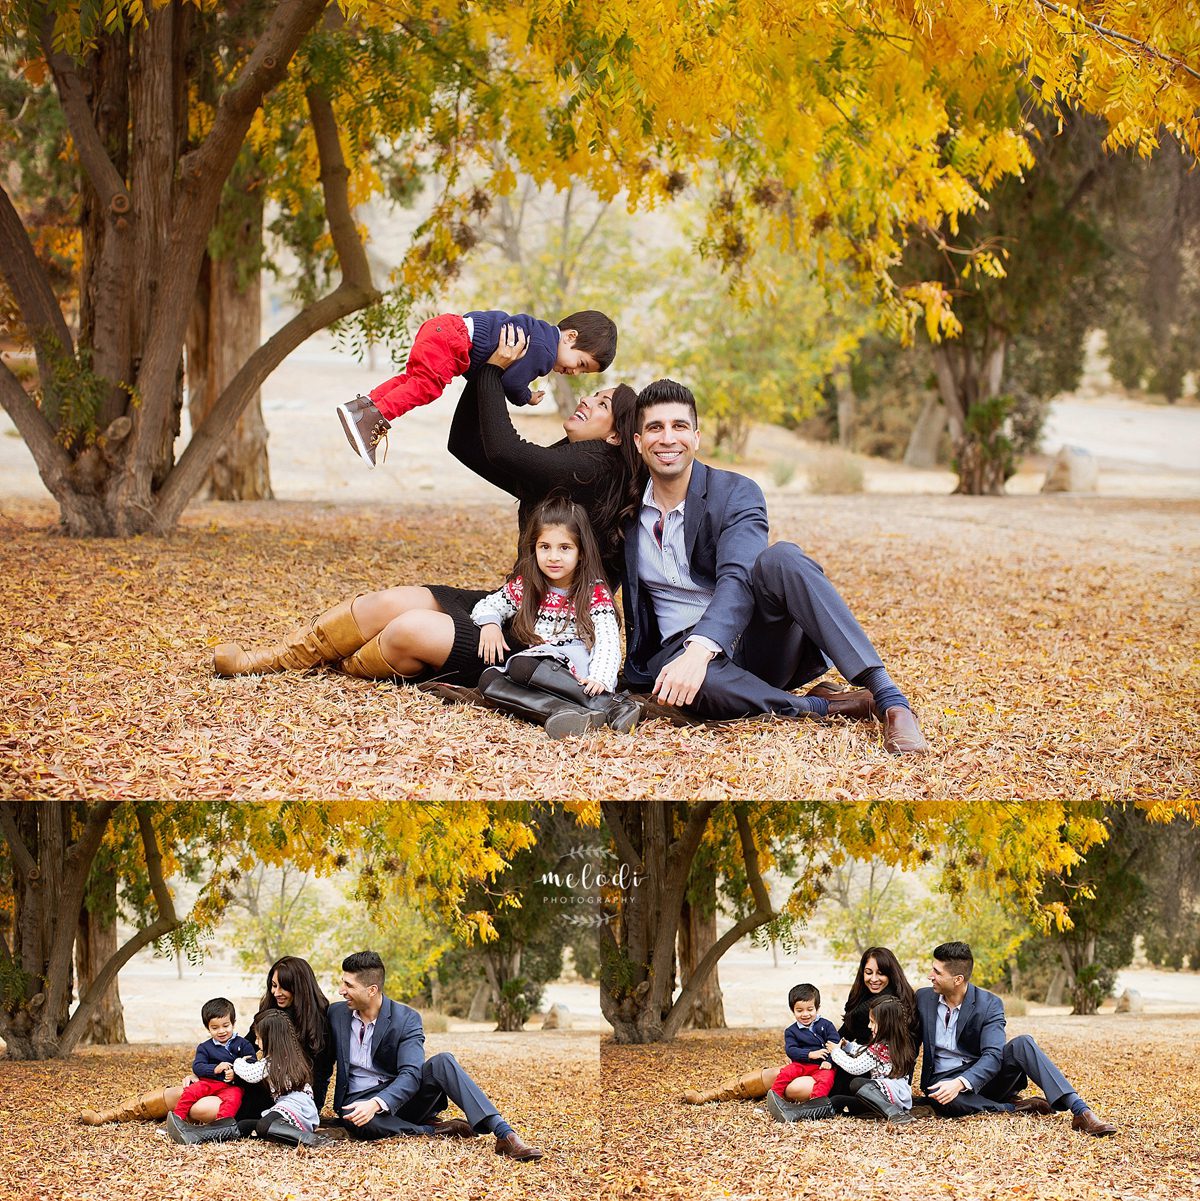 bakersfield_family_photographer_2016-11-30_0009_melodi_photography